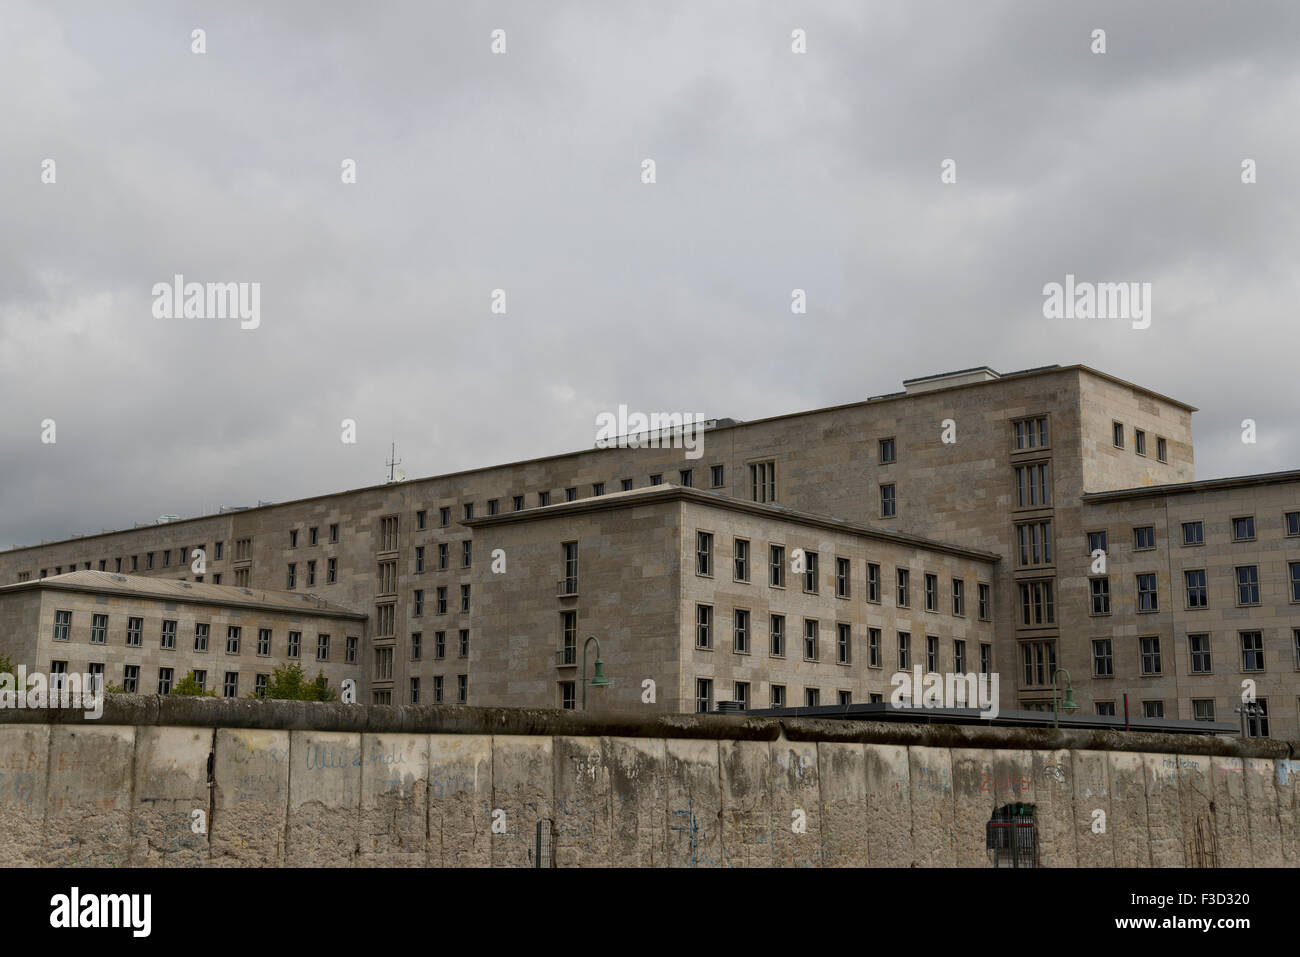 Nazi building of the German Third Reich in Berlin, with the Berlin wall in front. Stock Photo